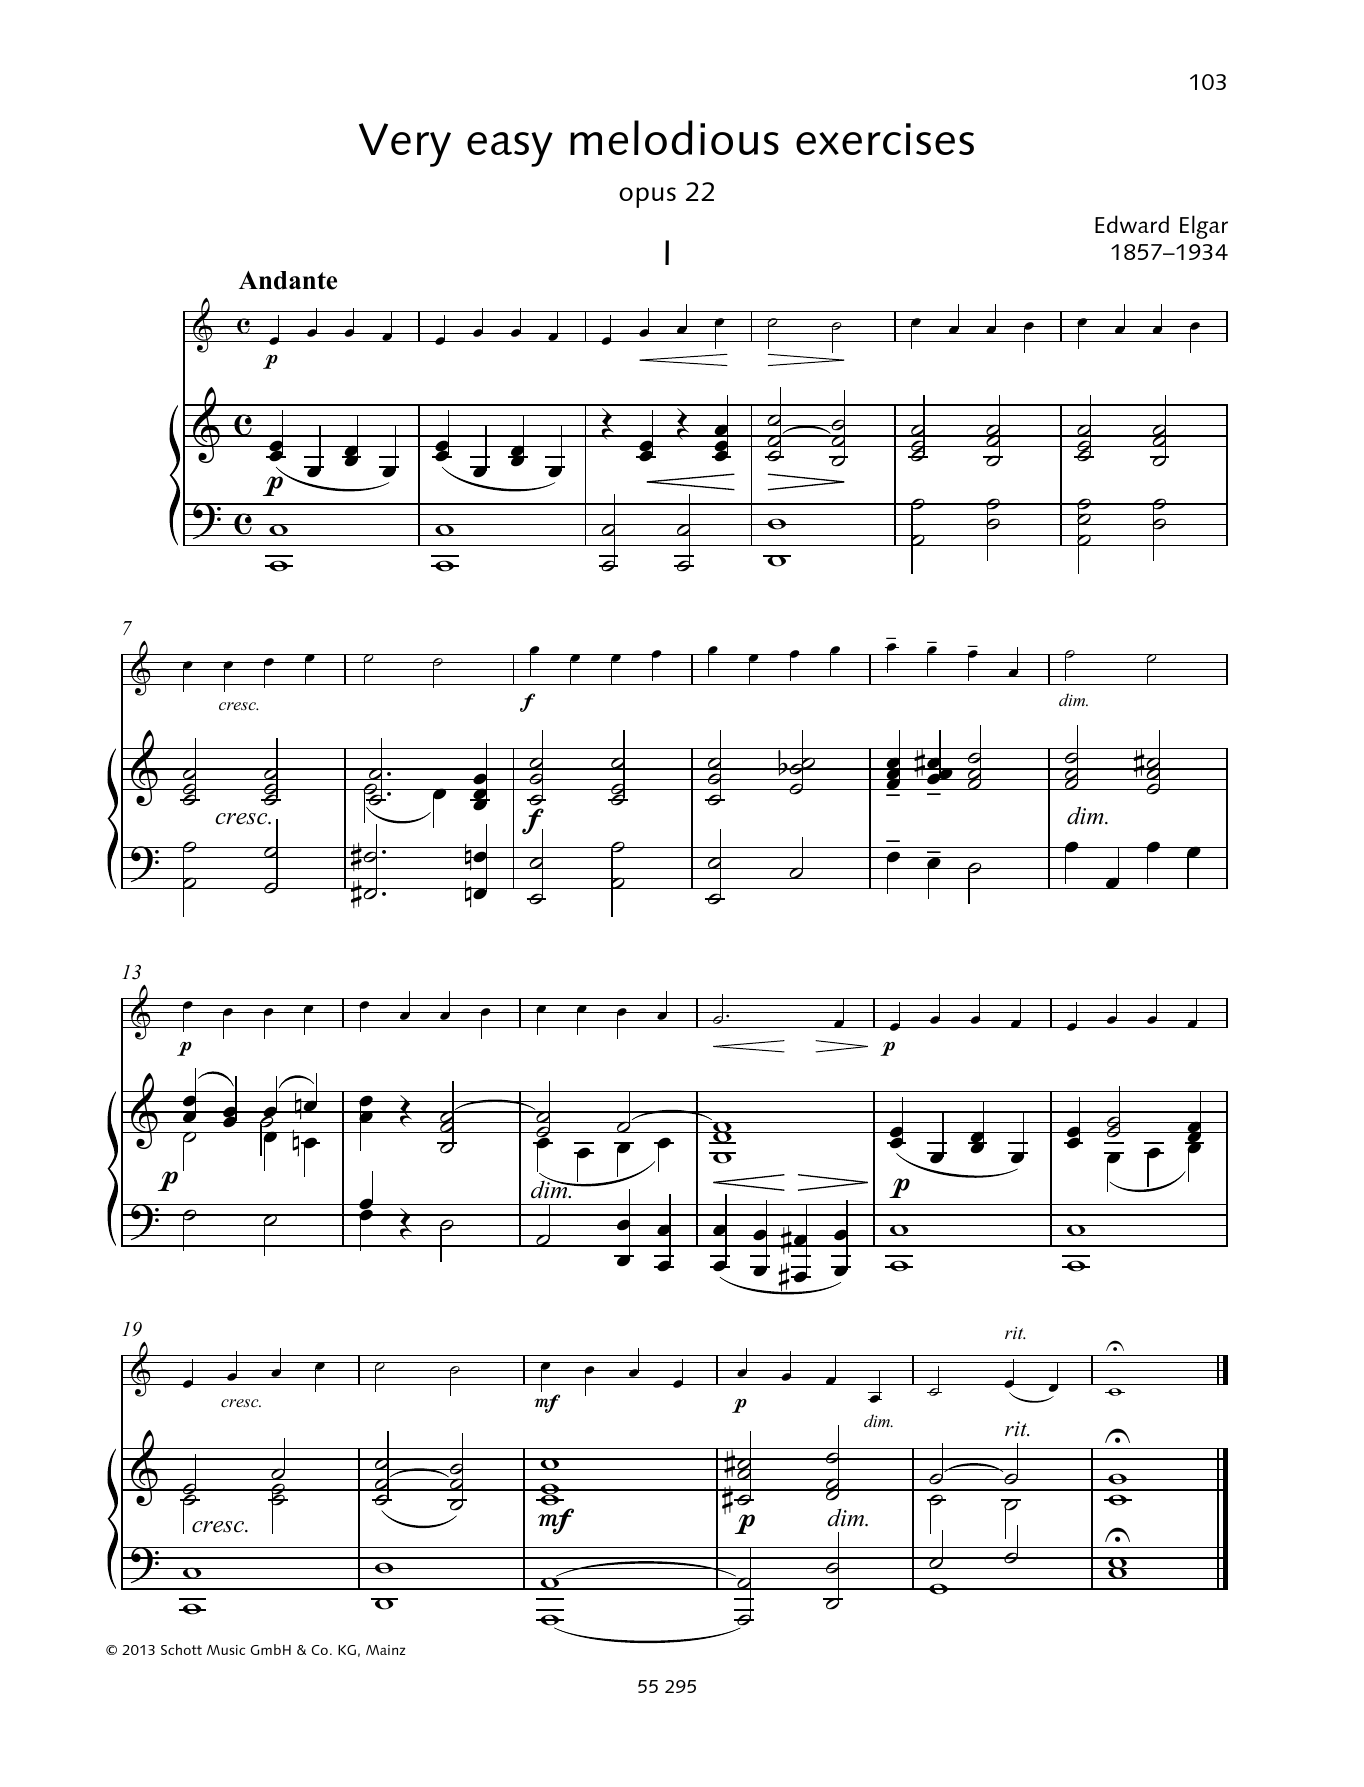 Download Edward Elgar Very easy melodious exercises Sheet Music